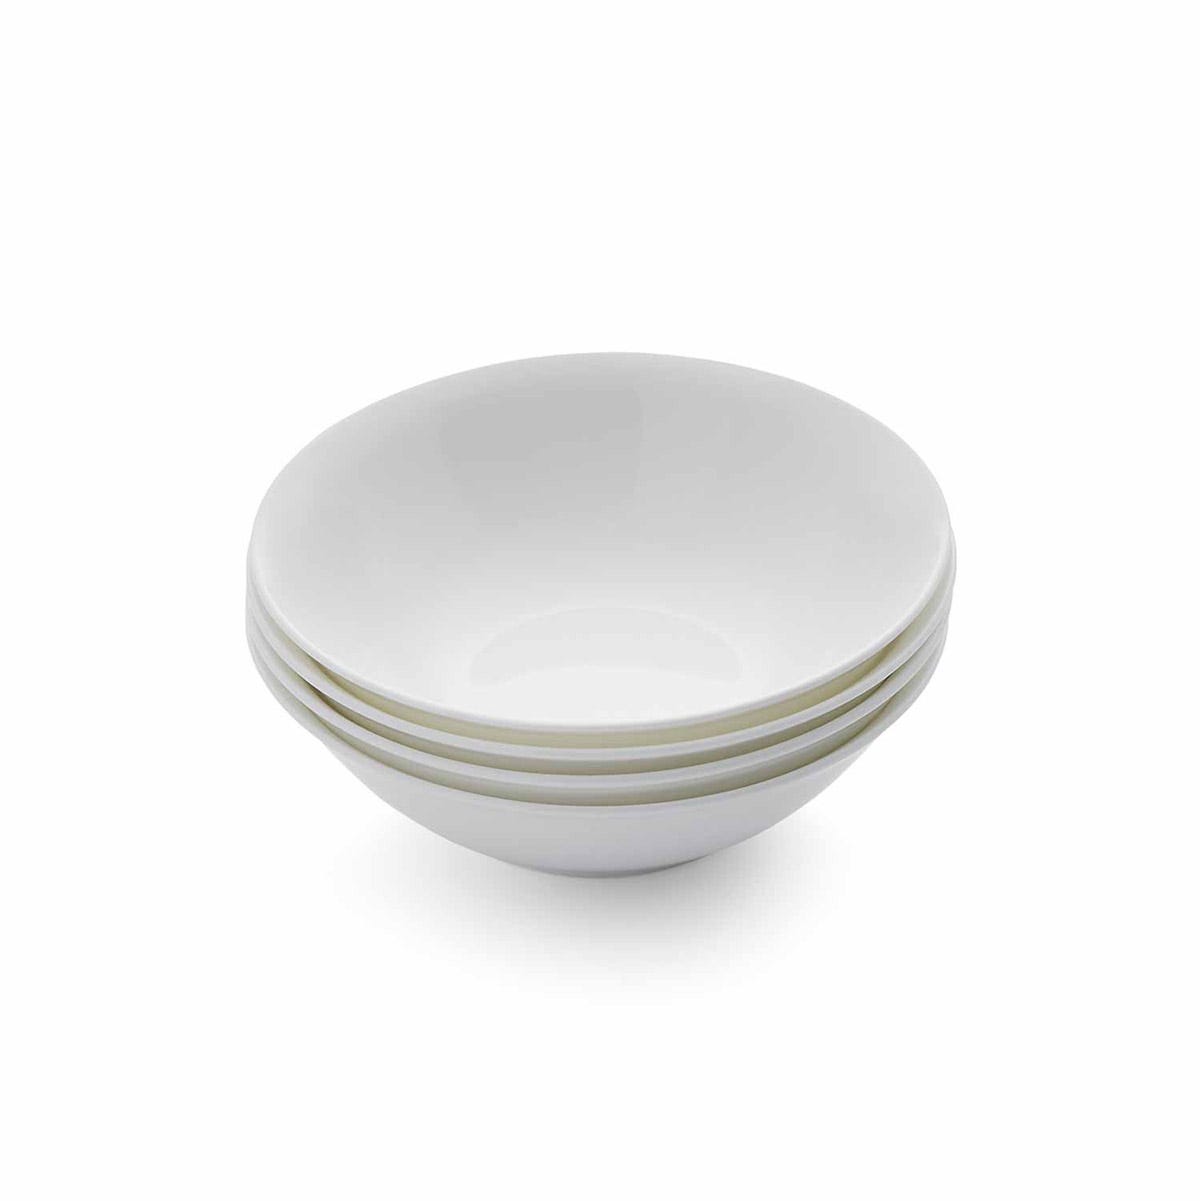 Serendipity Set of 4 Cereal Bowls